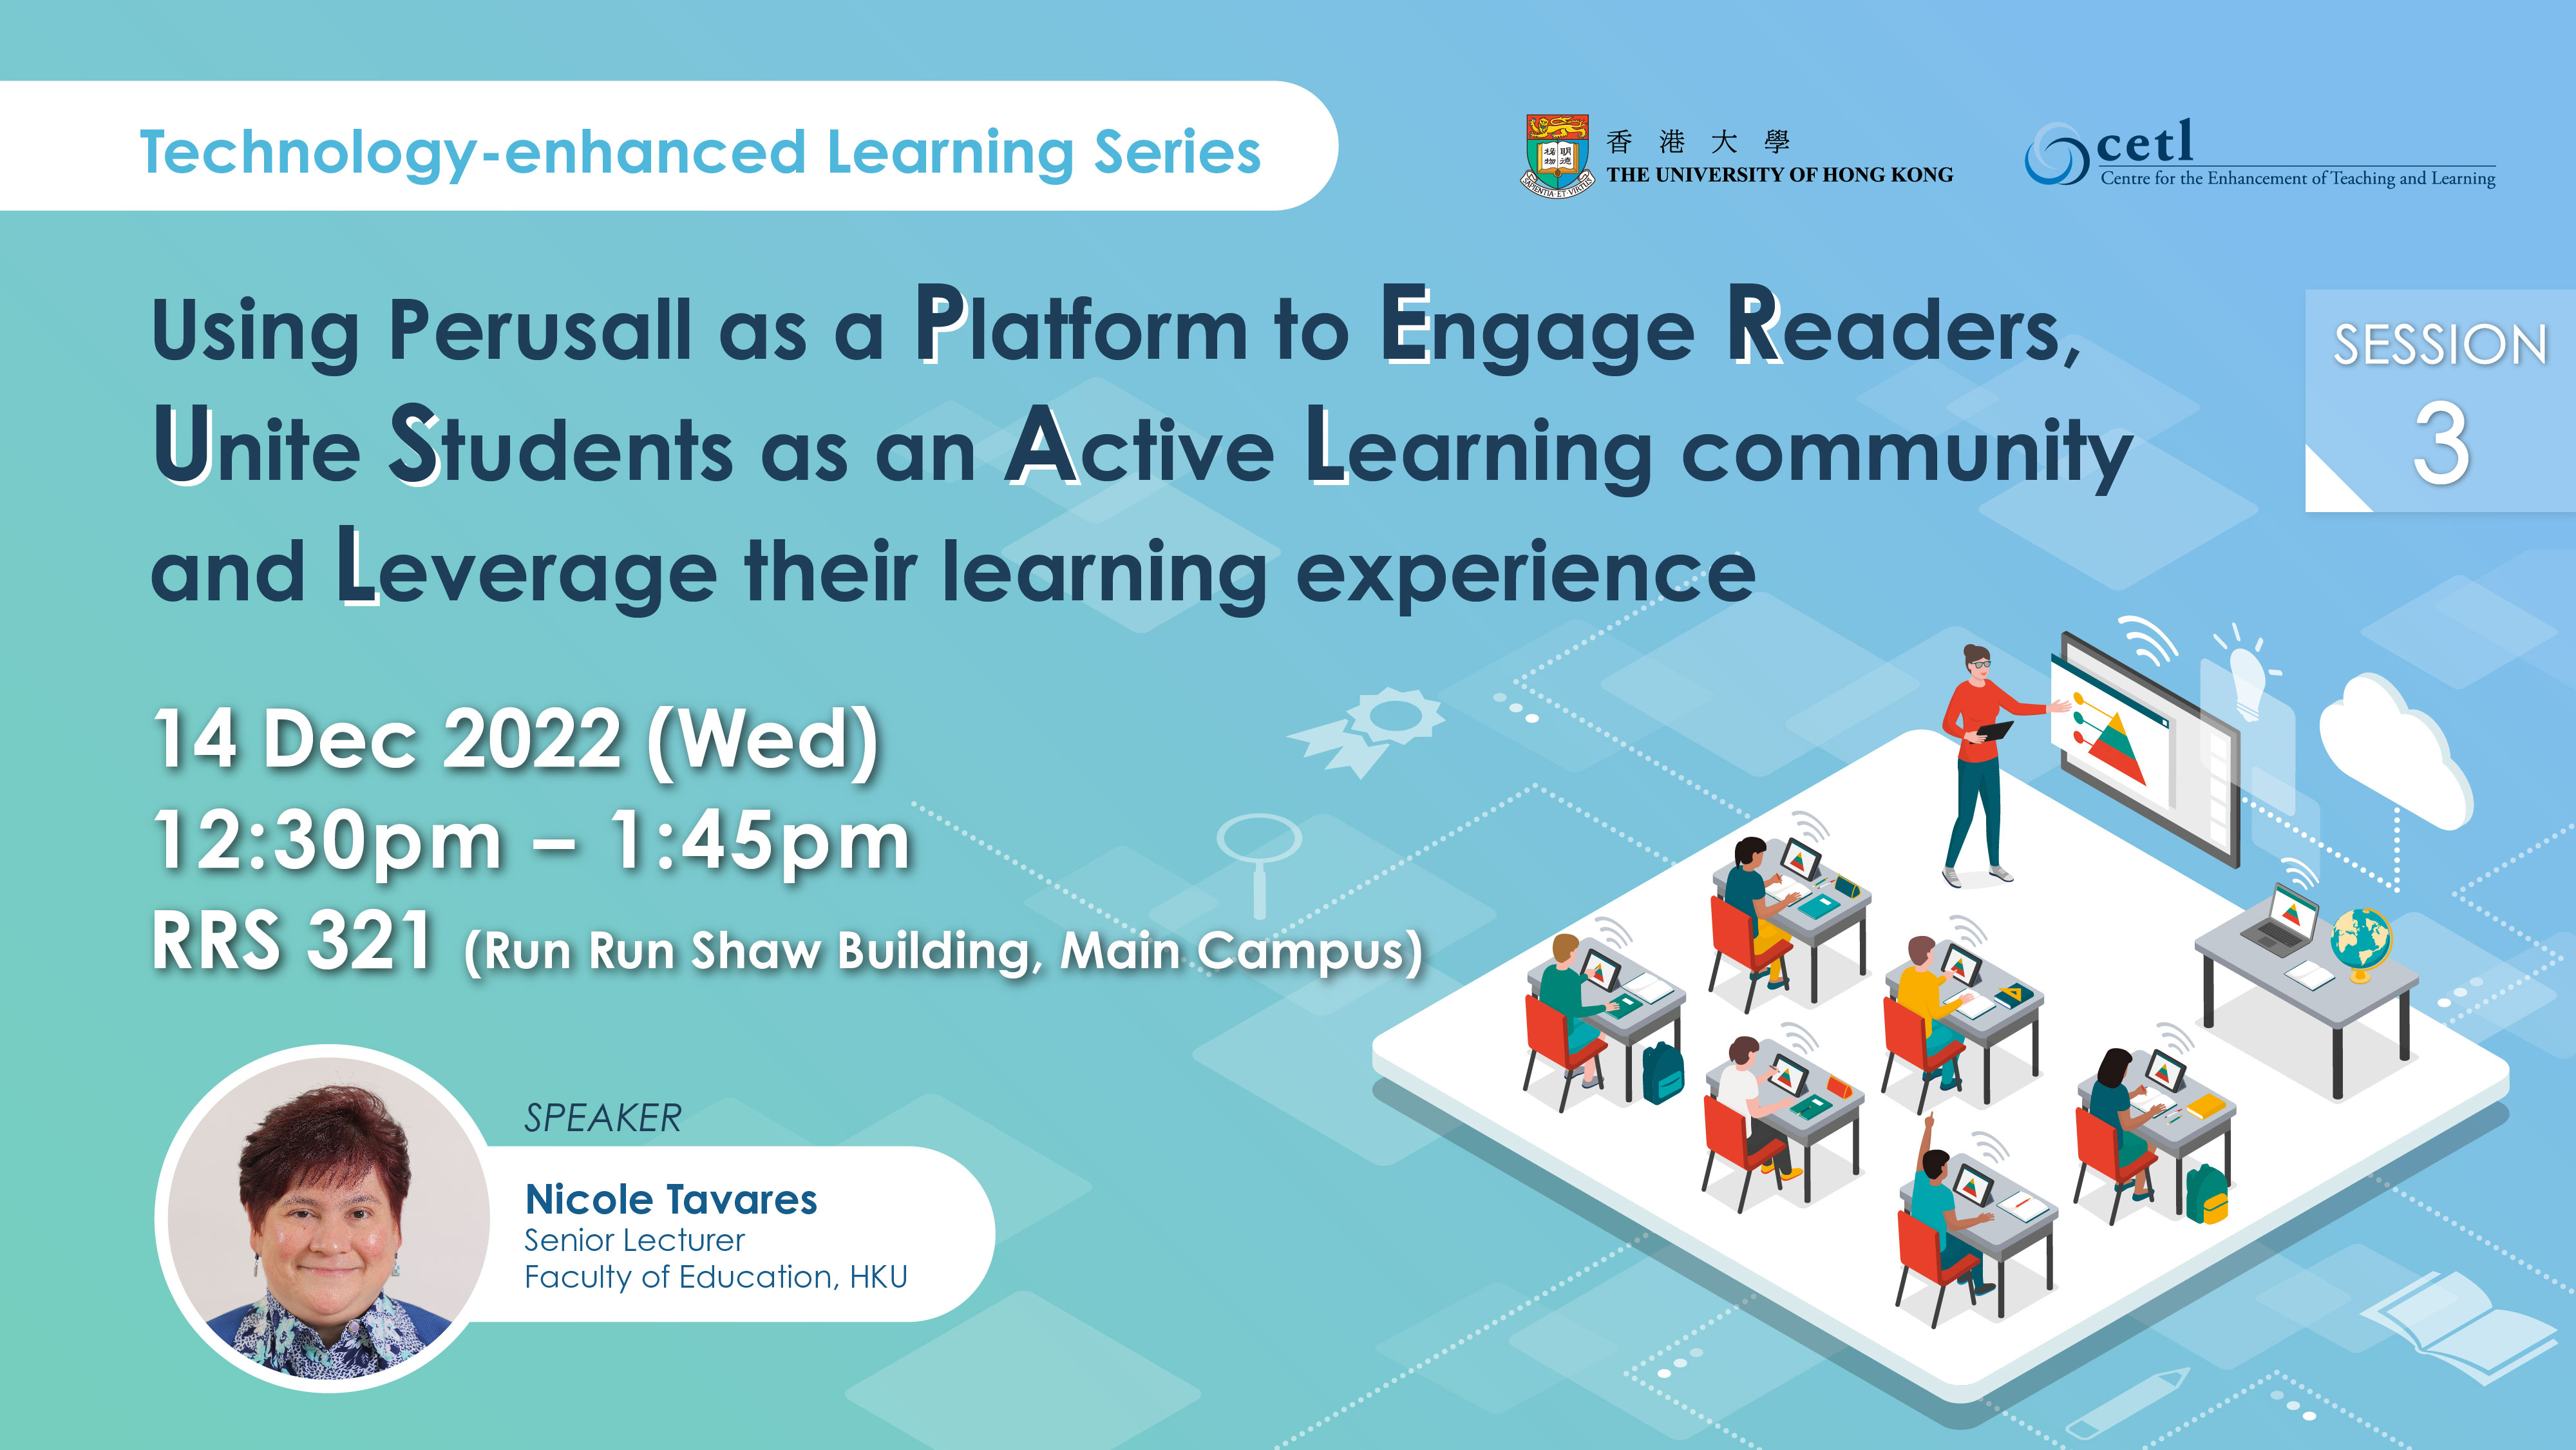 Session  3 - Using Perusall as a Platform to Engage Readers, Unite Students as an Active Learning community and Leverage their learning experience